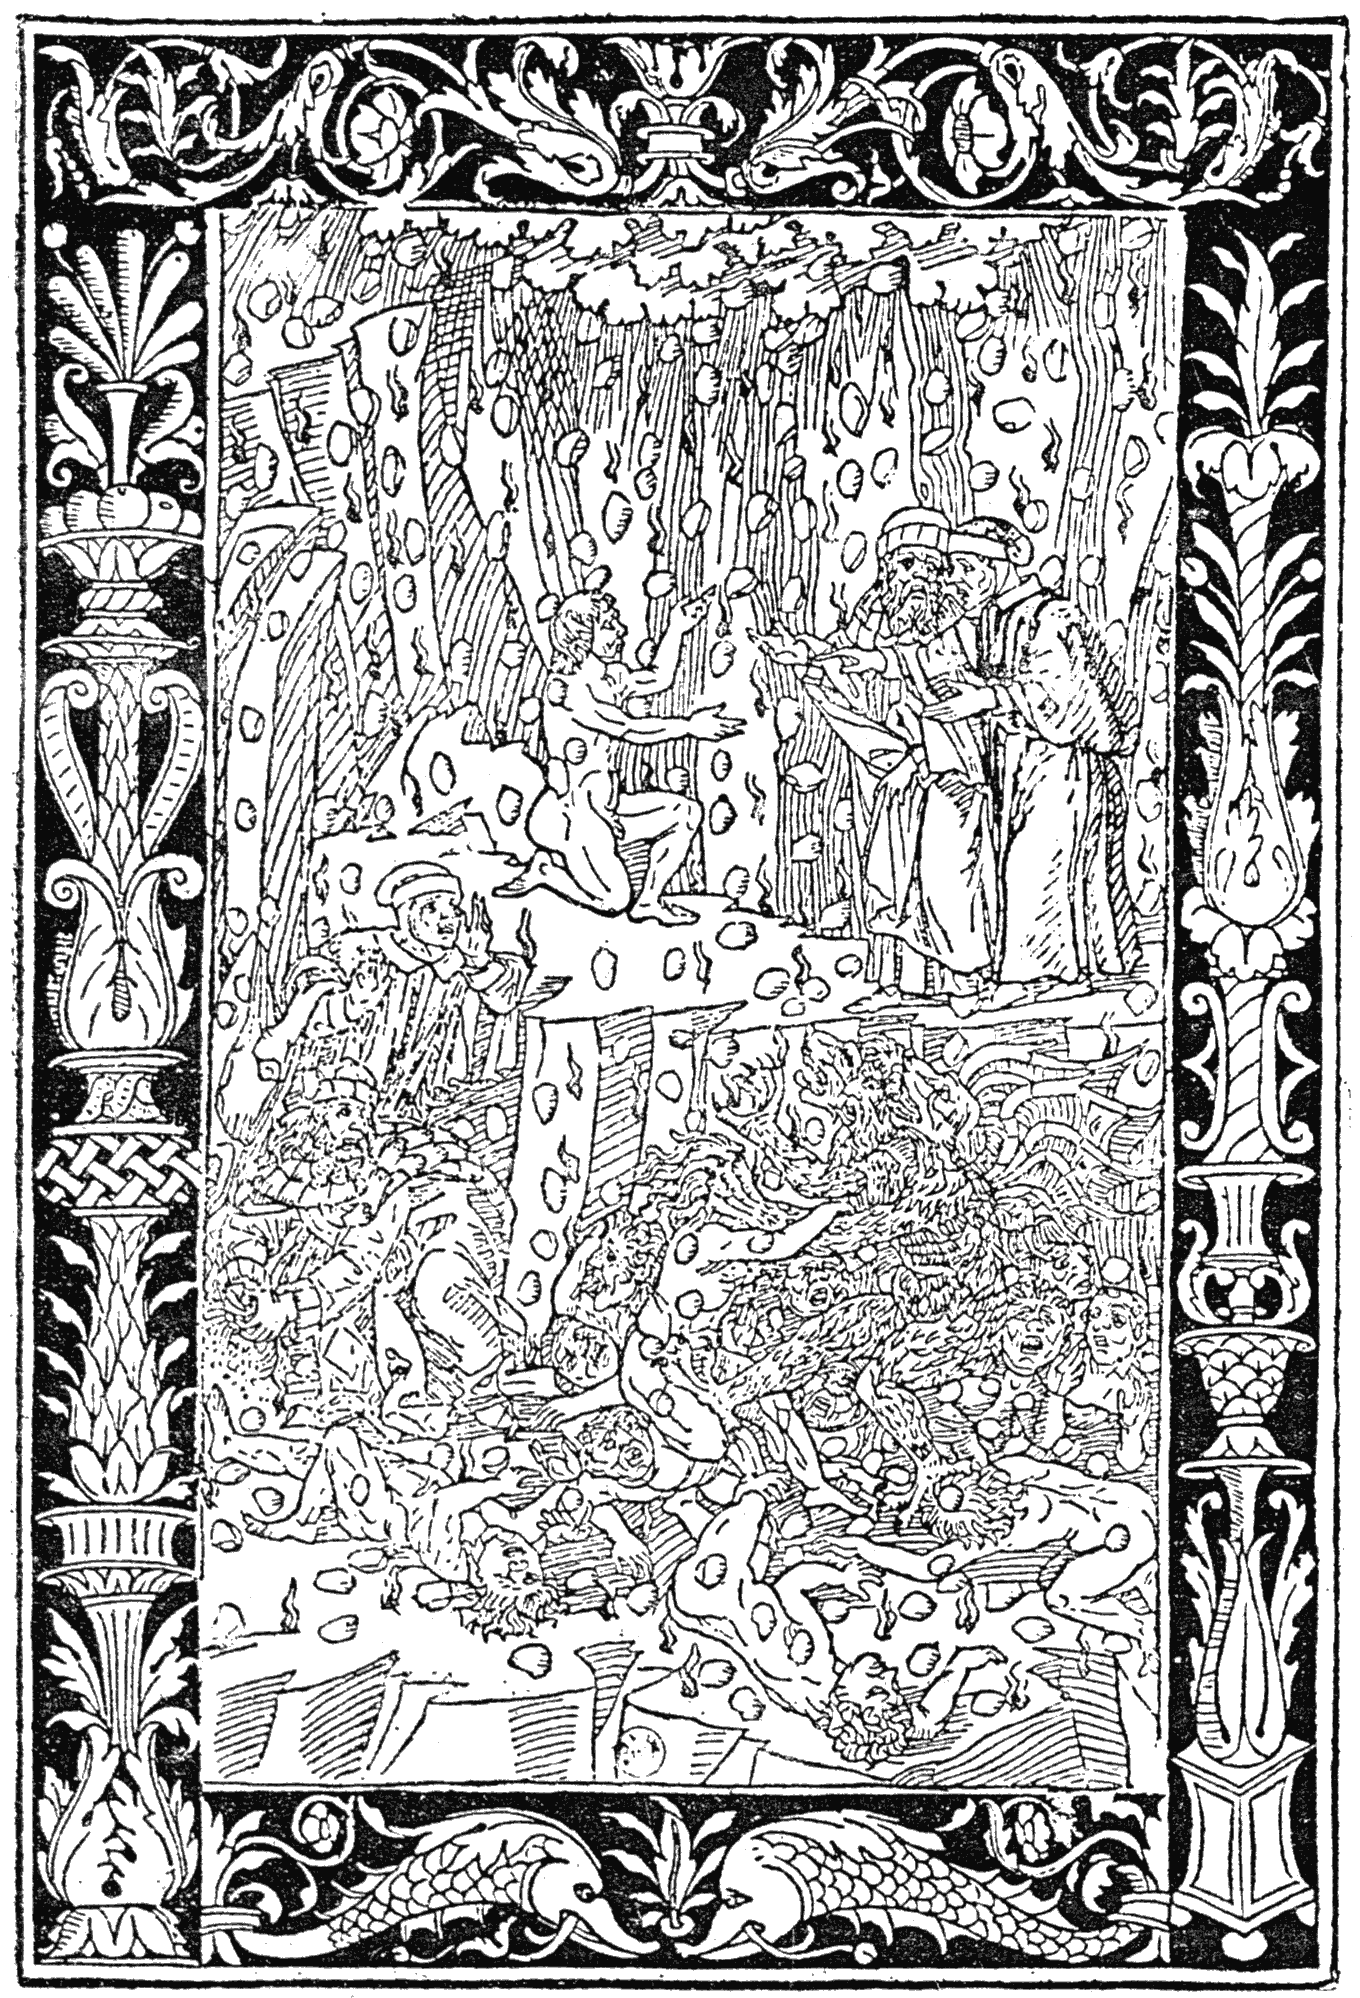 Plate from Bonino de Bonini's Dante, at Brescia, in 1487. From Henri Bouchot 'The Printed Book' (1887), page 57, published size in Bouchot 7.9cm wide by 11.8cm high.